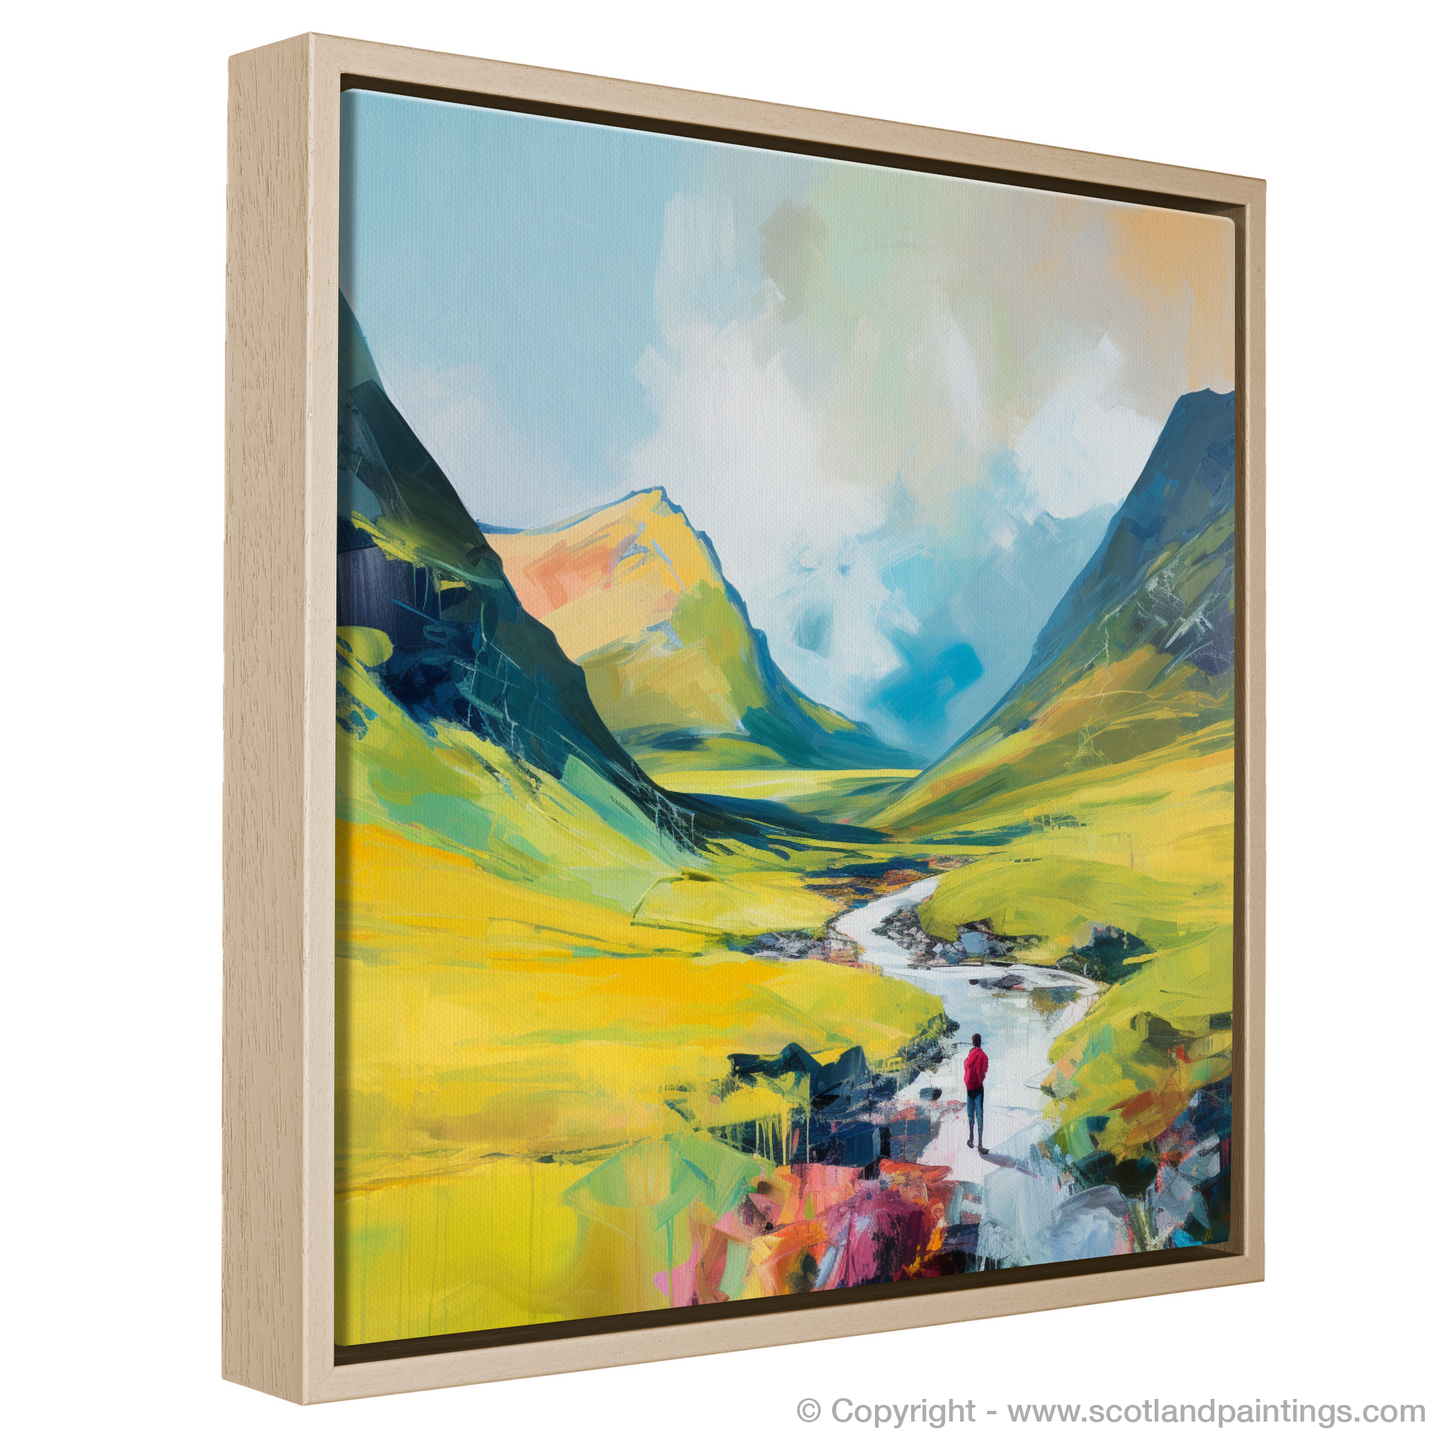 Painting and Art Print of Lone hiker in Glencoe during summer entitled "Solitary Hiker's Summer in Glencoe".